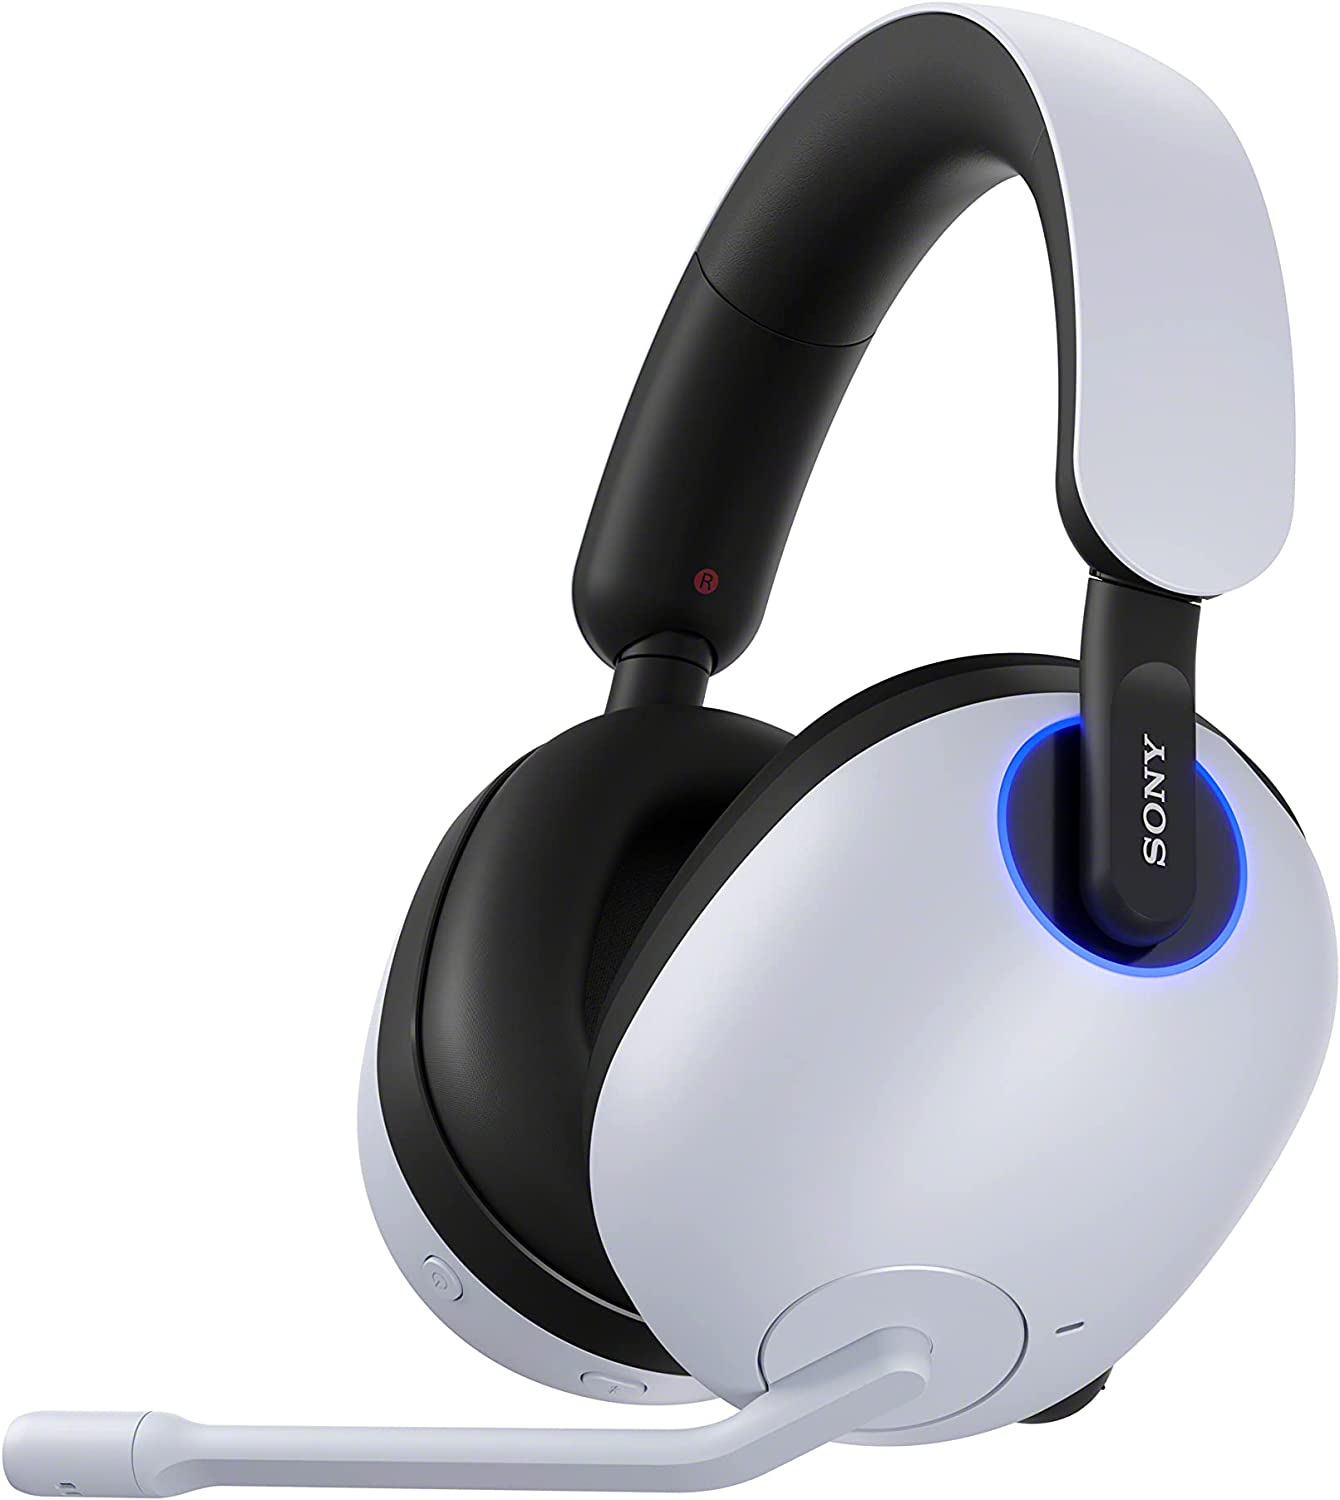 Sony-INZONE H9 Wireless Noise Canceling Gaming Headset For PC and PlayStation 5